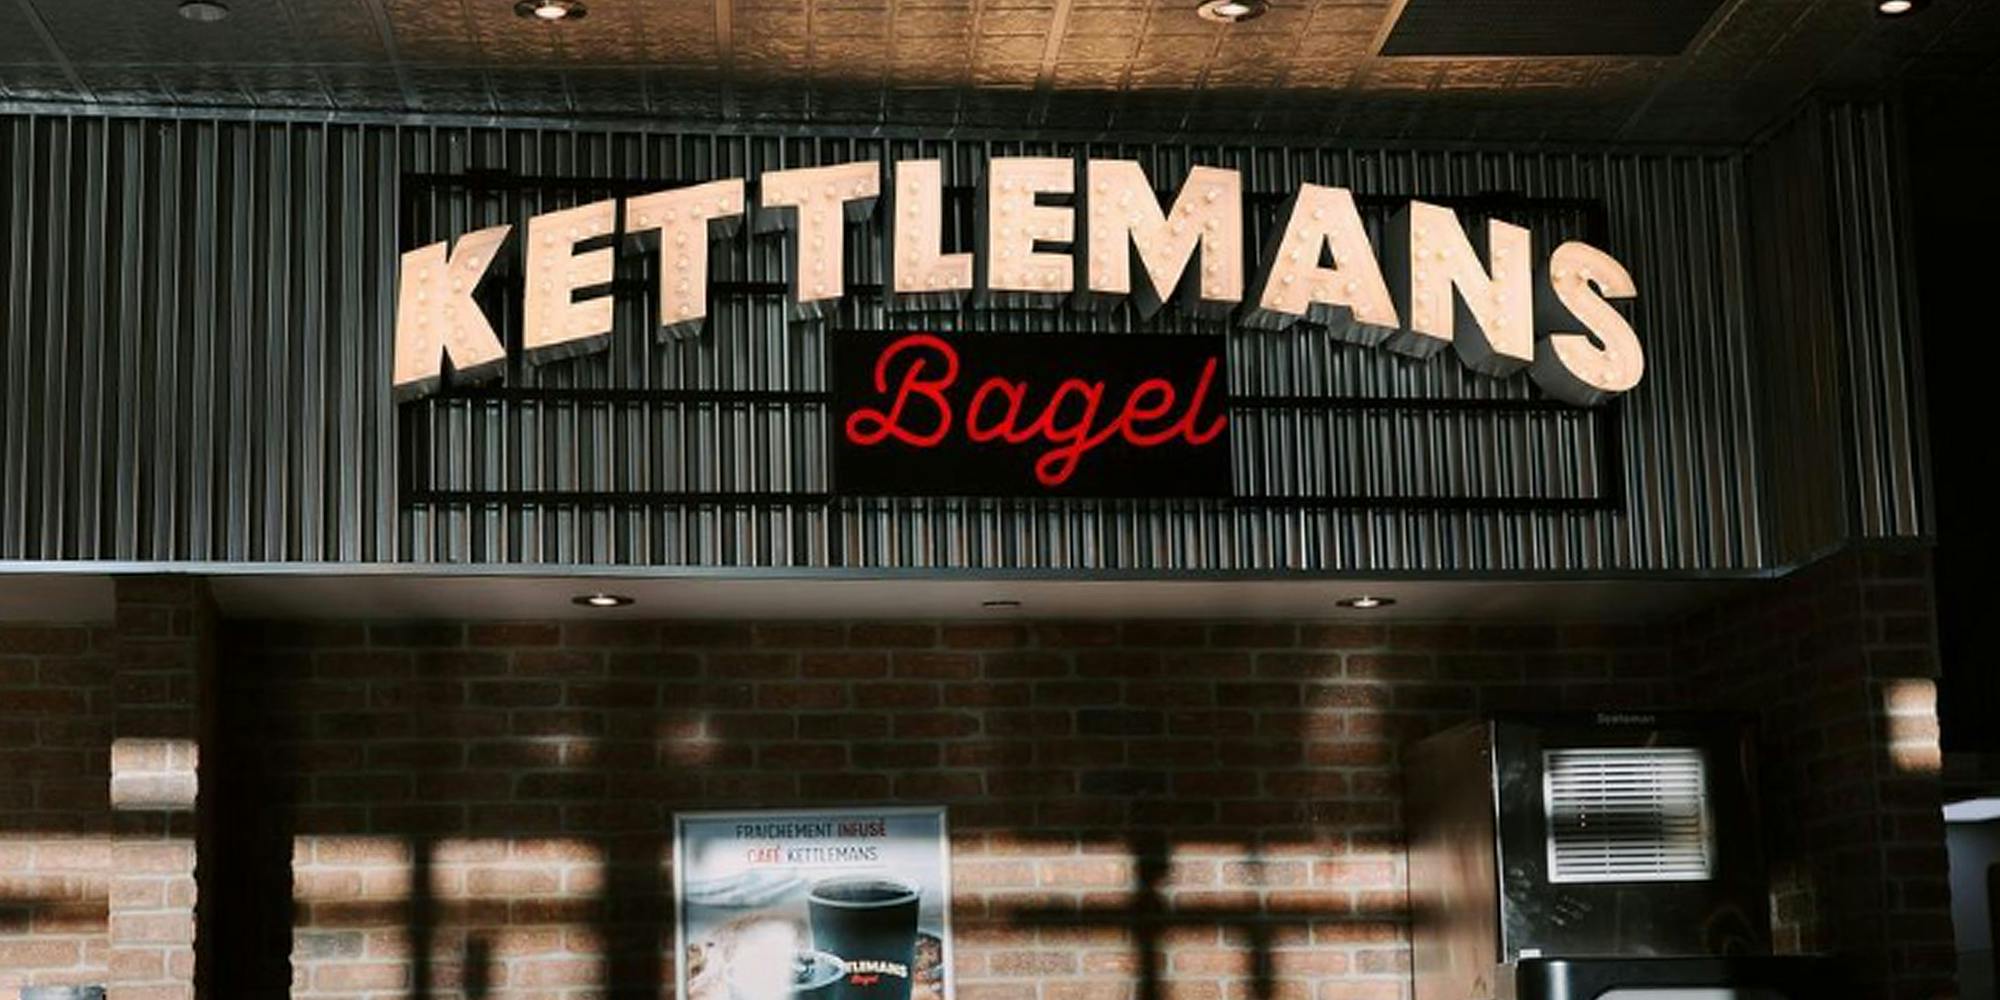 ‘I’m traumatized’: Kettlemans Bagel employee says she was fired after reporting she was raped